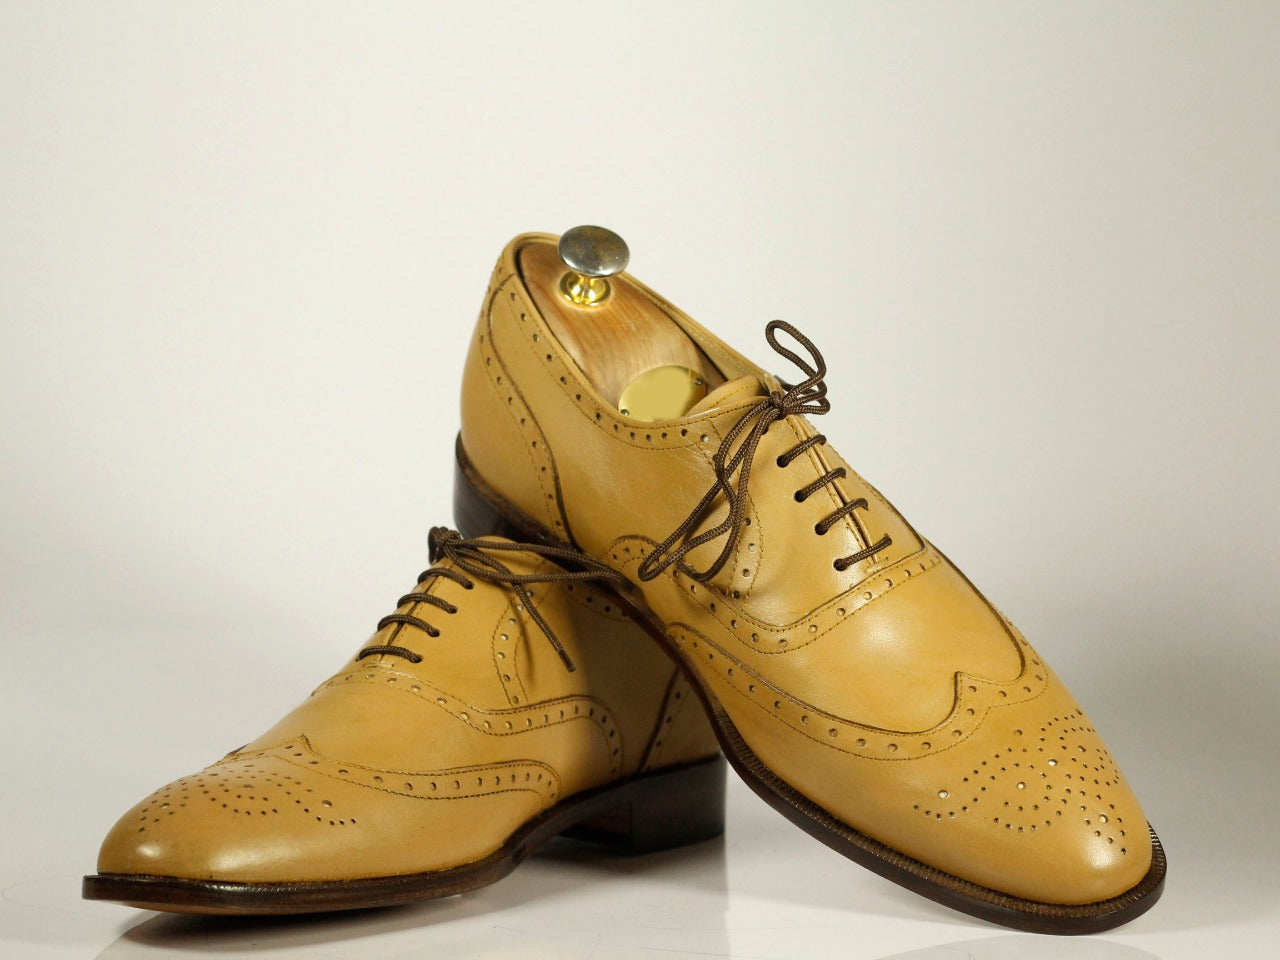 Mens formal Shoes at Best Price in Kochi | Taaz Group